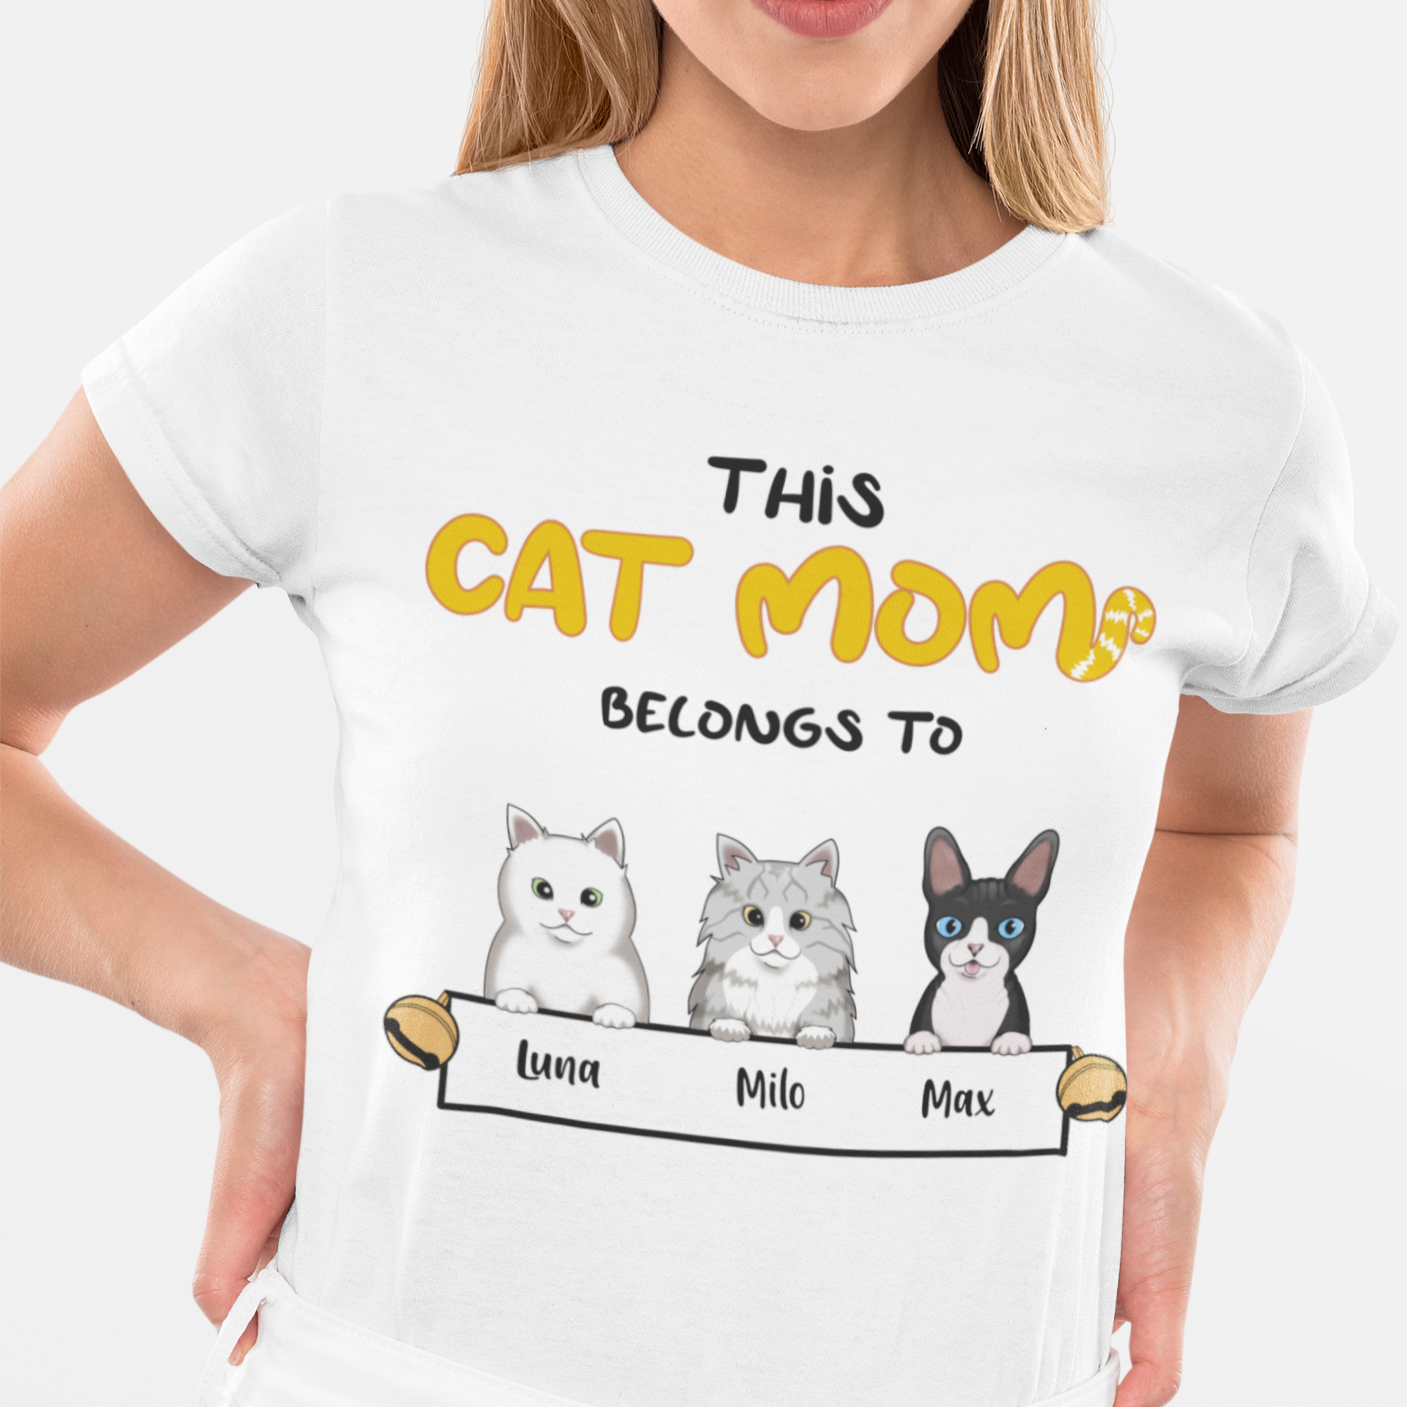 Woman wearing a Personalized Cat Mom T-Shirt with unique cat motif print.